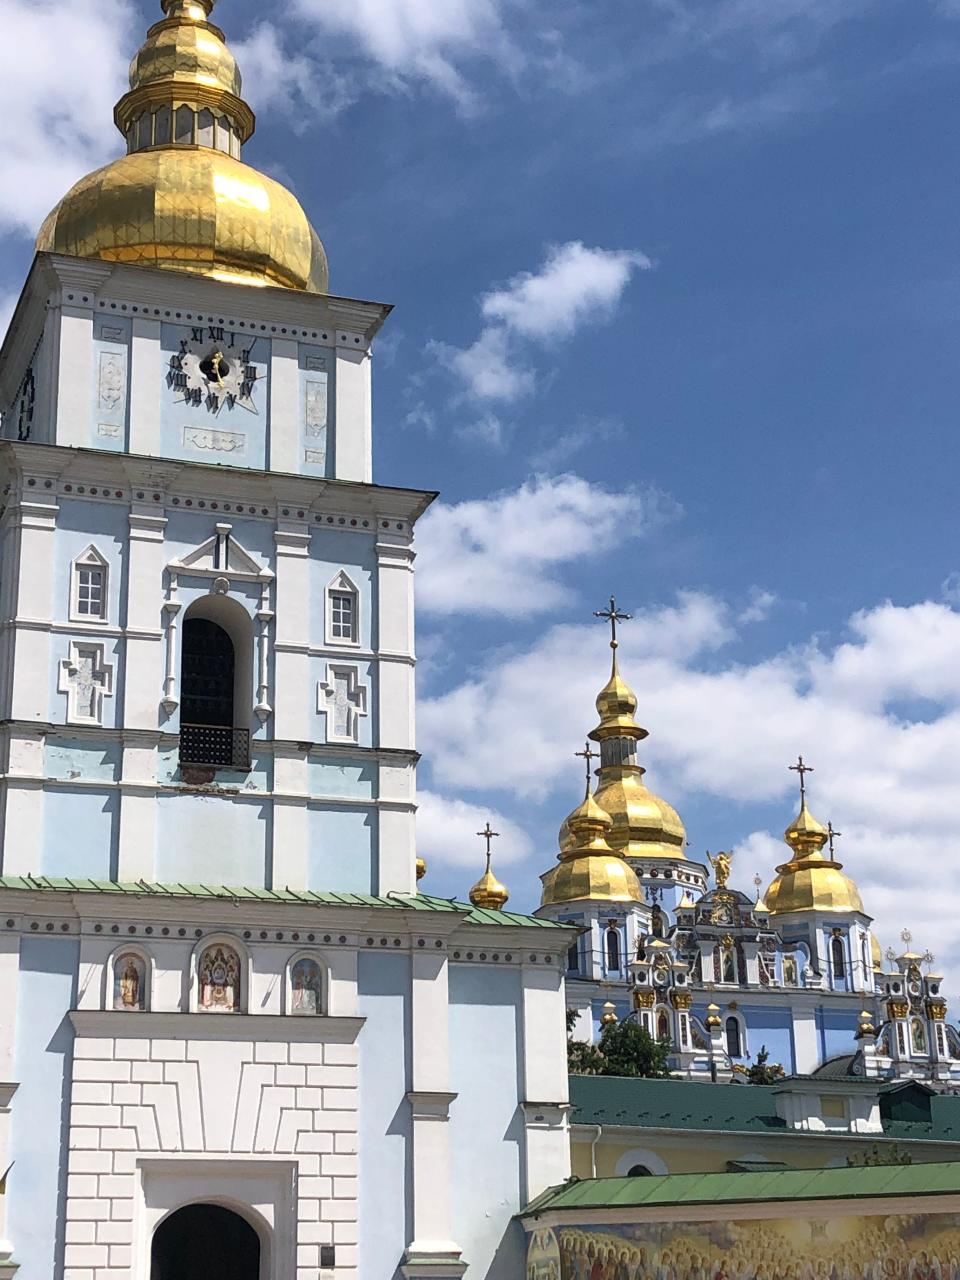 A Kharkiv, Ukraine, church sustained missile damage at hte top left of one of its ornate domes during the country's war with Russia, which began in 2022. Aide volunteer Jim Gamache, of Miromar Lakes, Florida, stayed blocks from the site in September 2023.